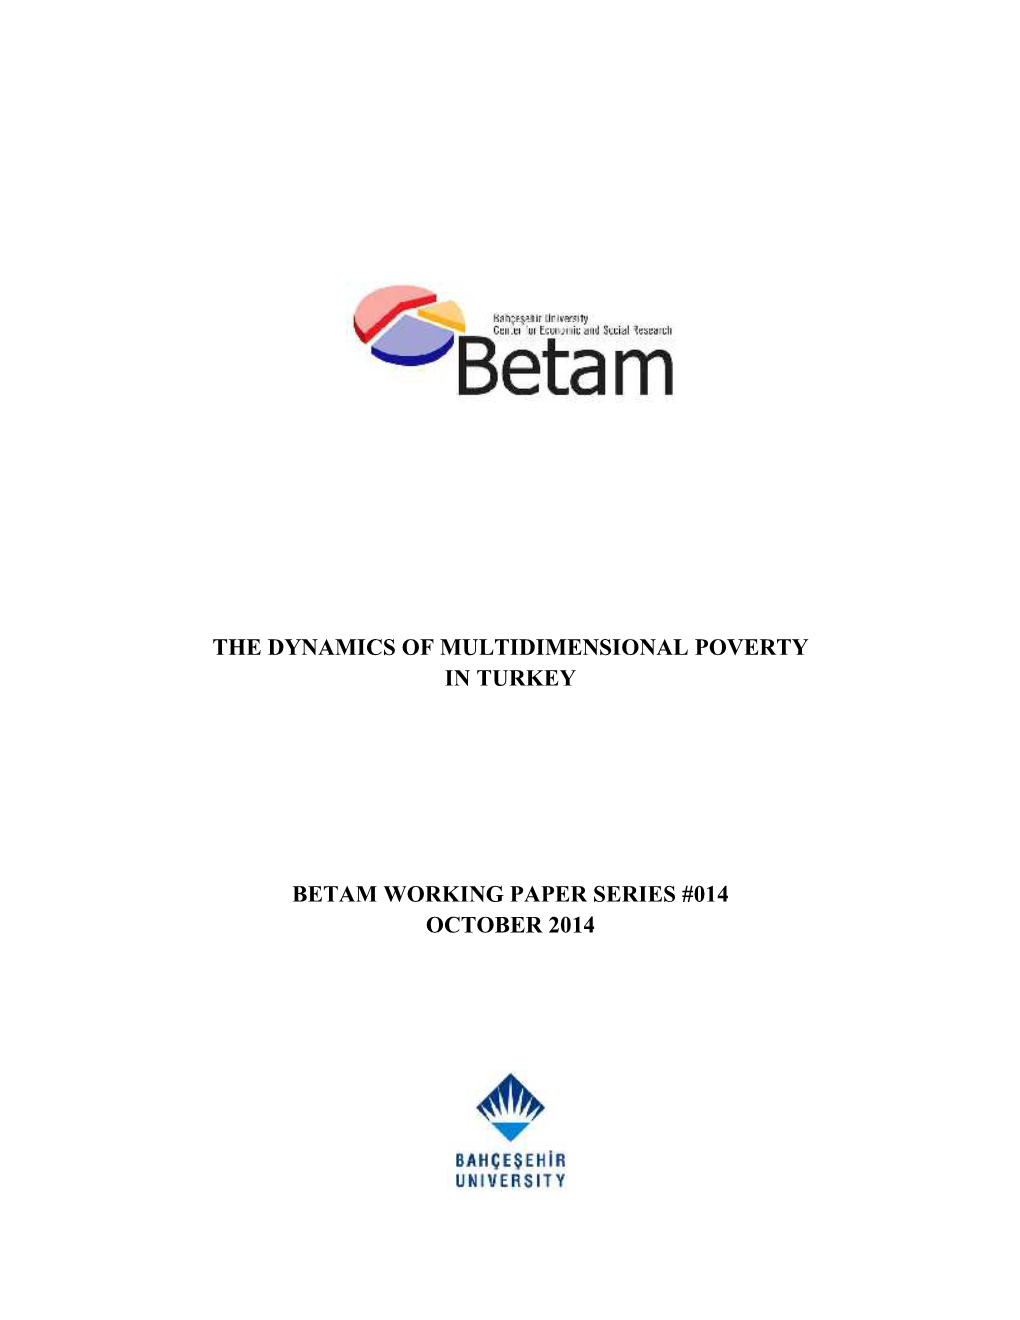 The Dynamics of Multidimensional Poverty in Turkey Betam Working